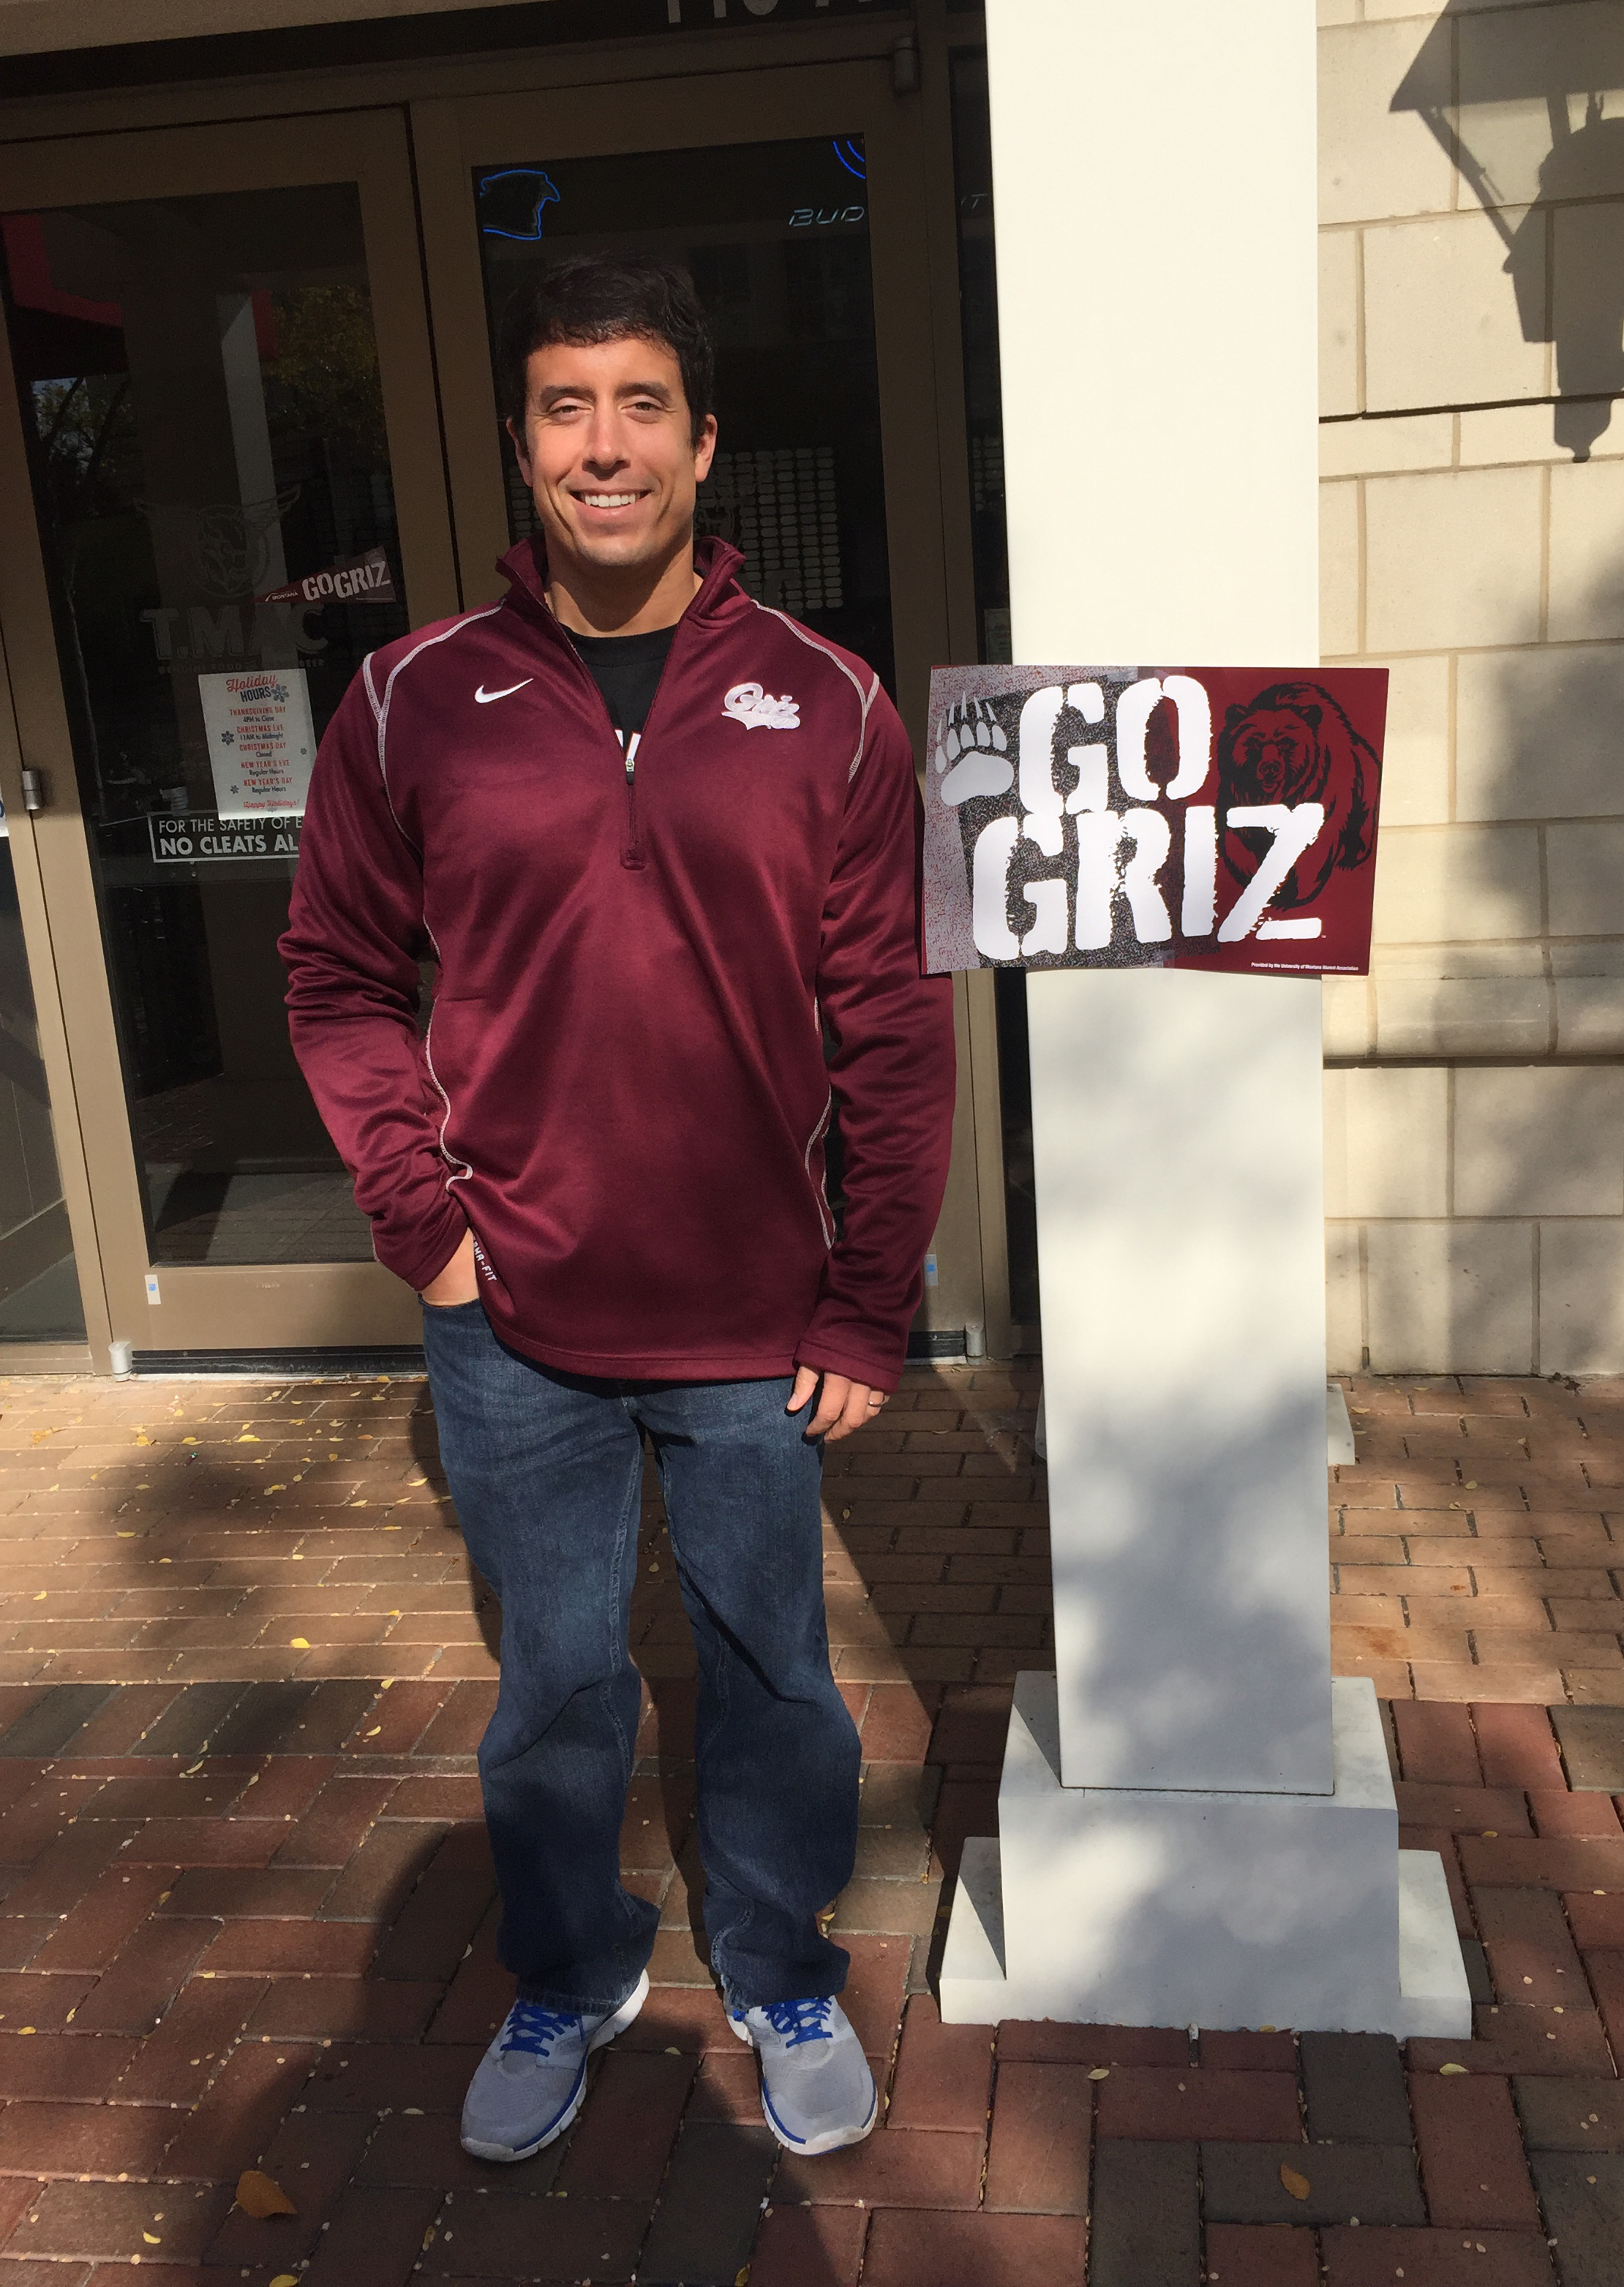 It goes without saying that whenever you see something Griz-related on the other side of the country, you must take a photo with it.